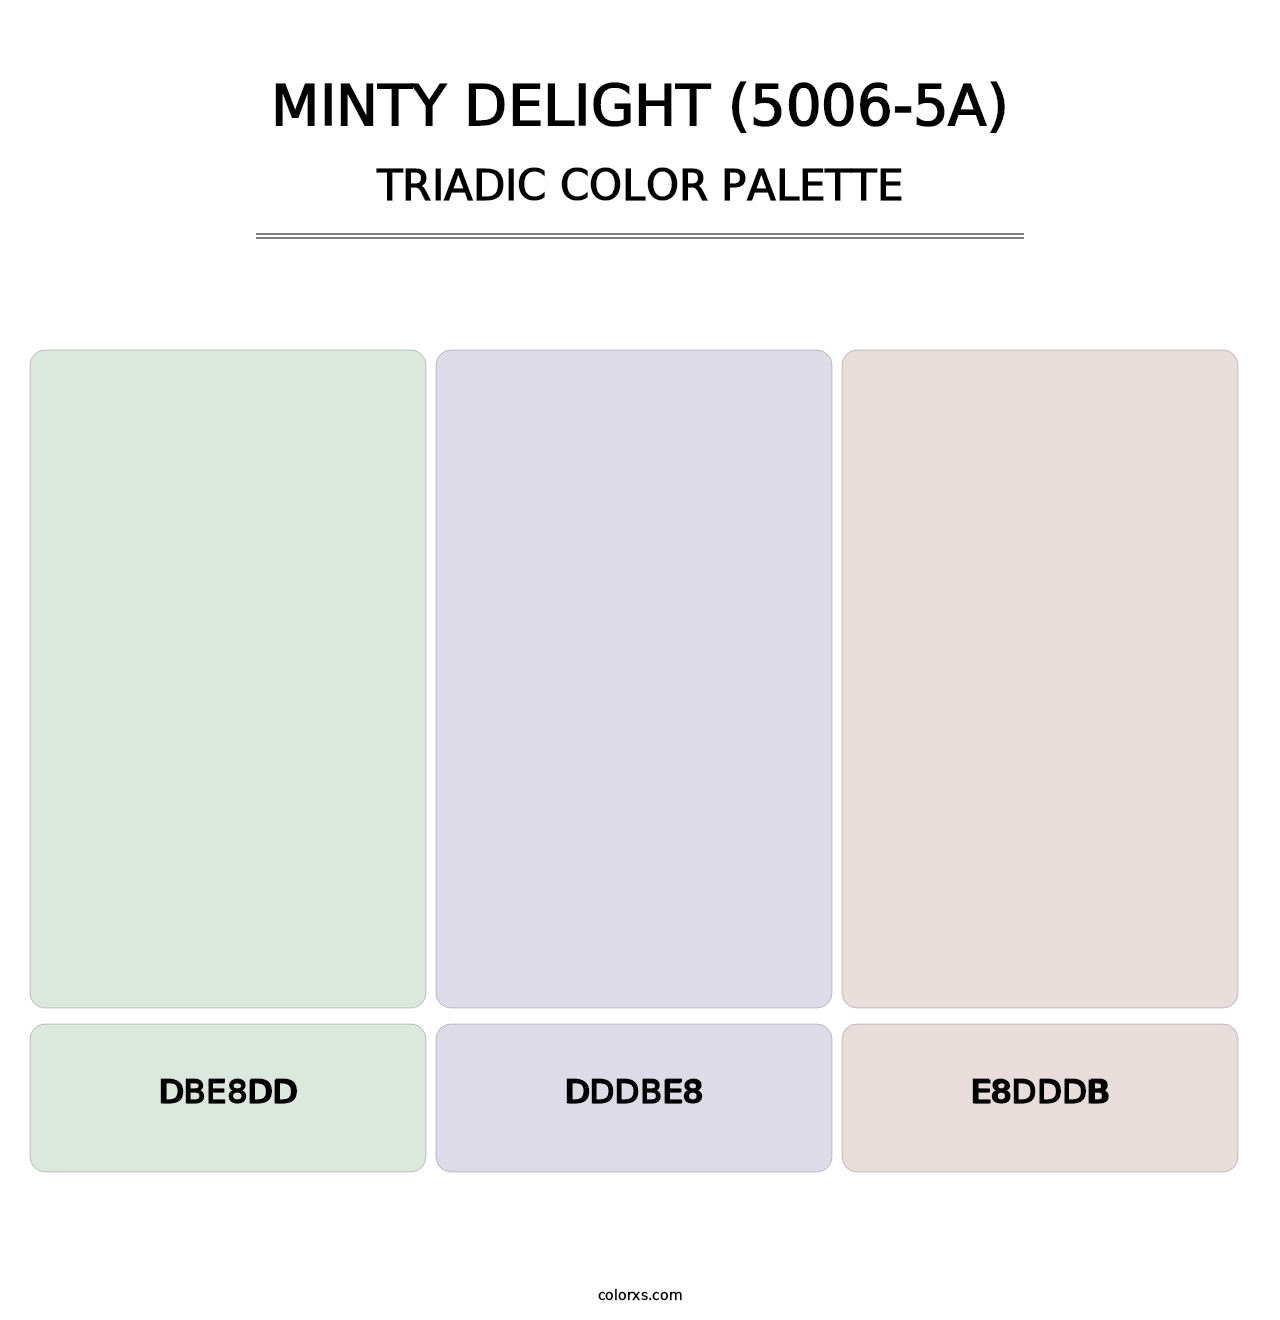 Minty Delight (5006-5A) - Triadic Color Palette